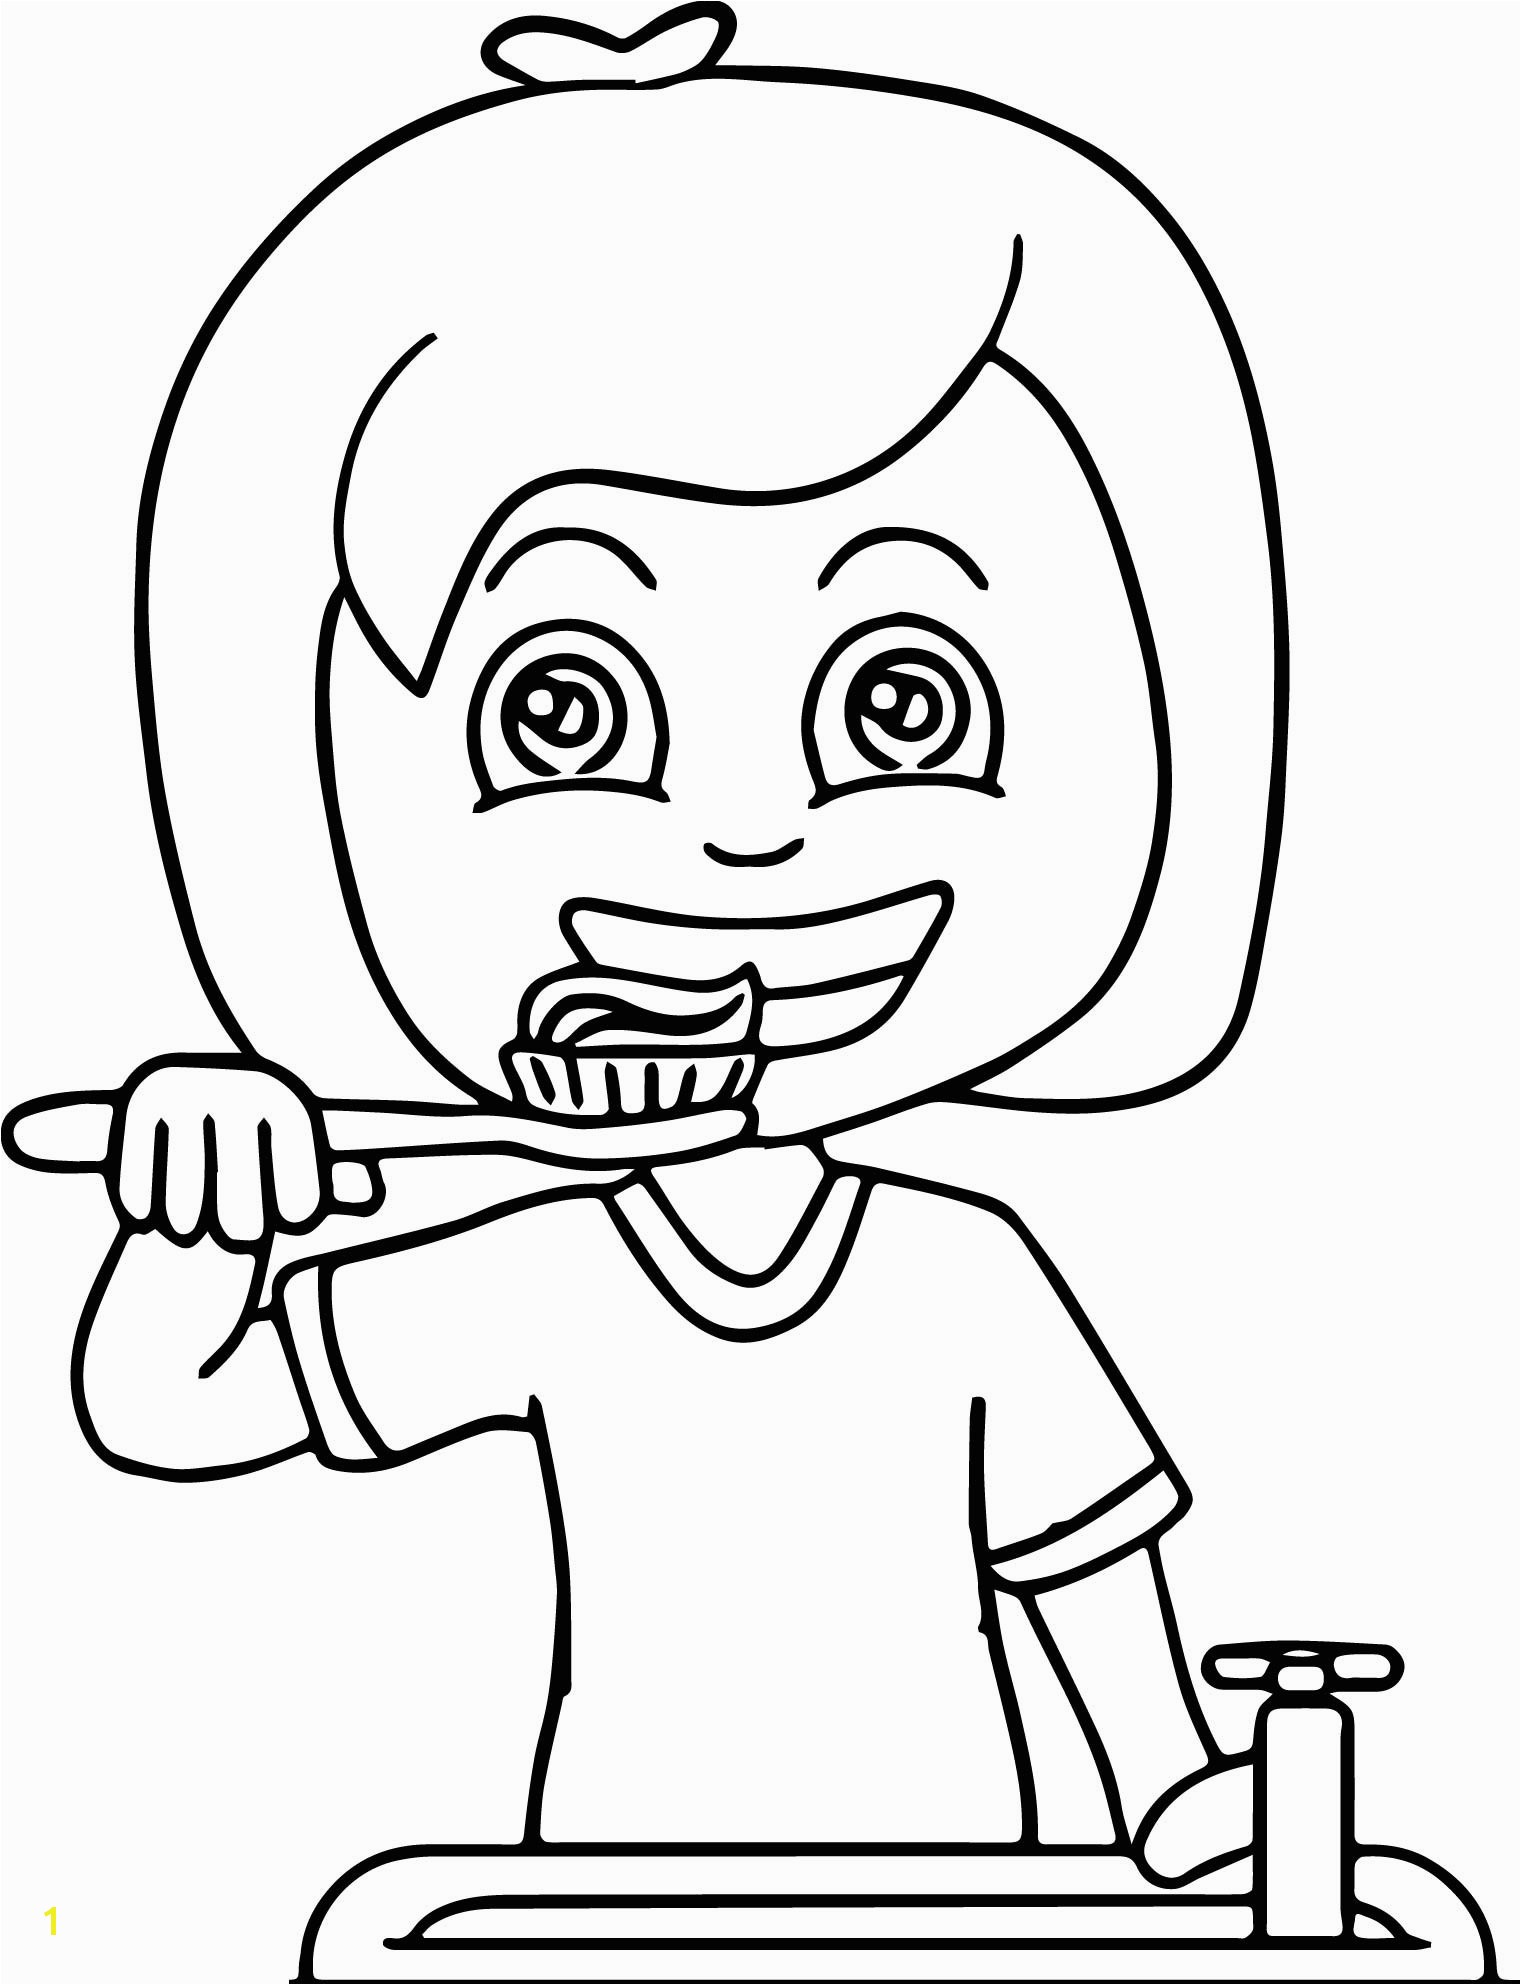 Tooth Coloring Page New Unbelievable the Best toothbrush Coloring Page Preschool A to Print